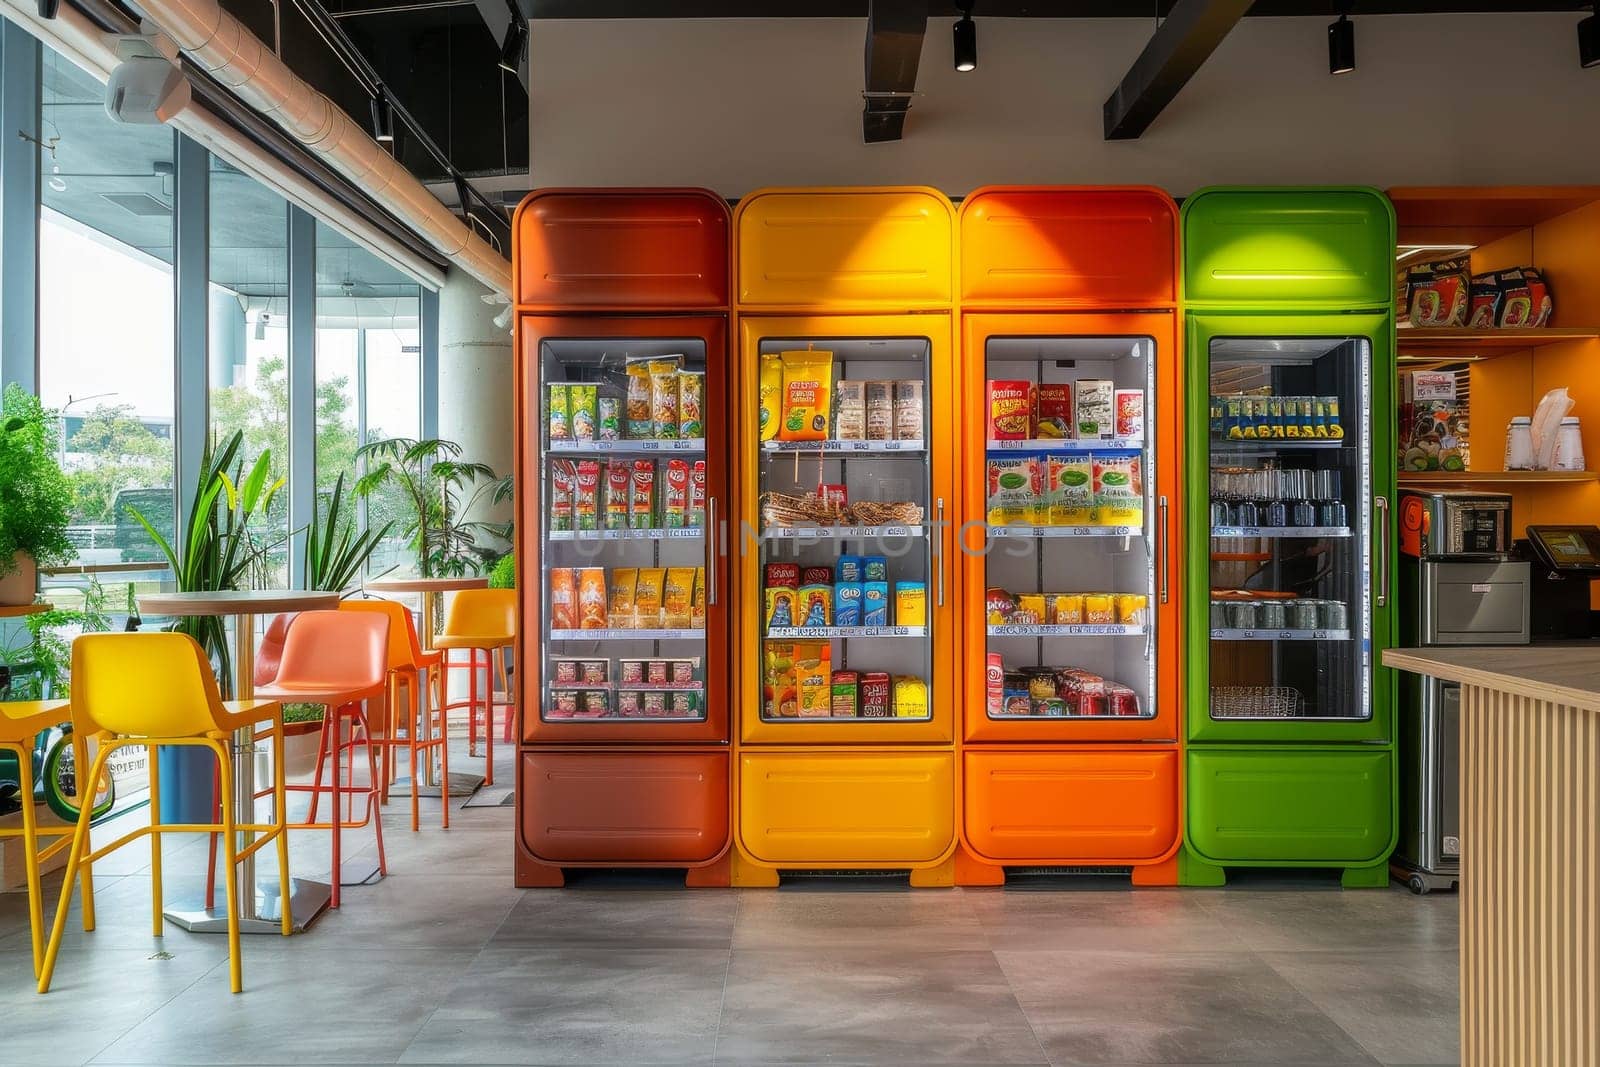 A colorful vending machine with a variety of food and drinks.